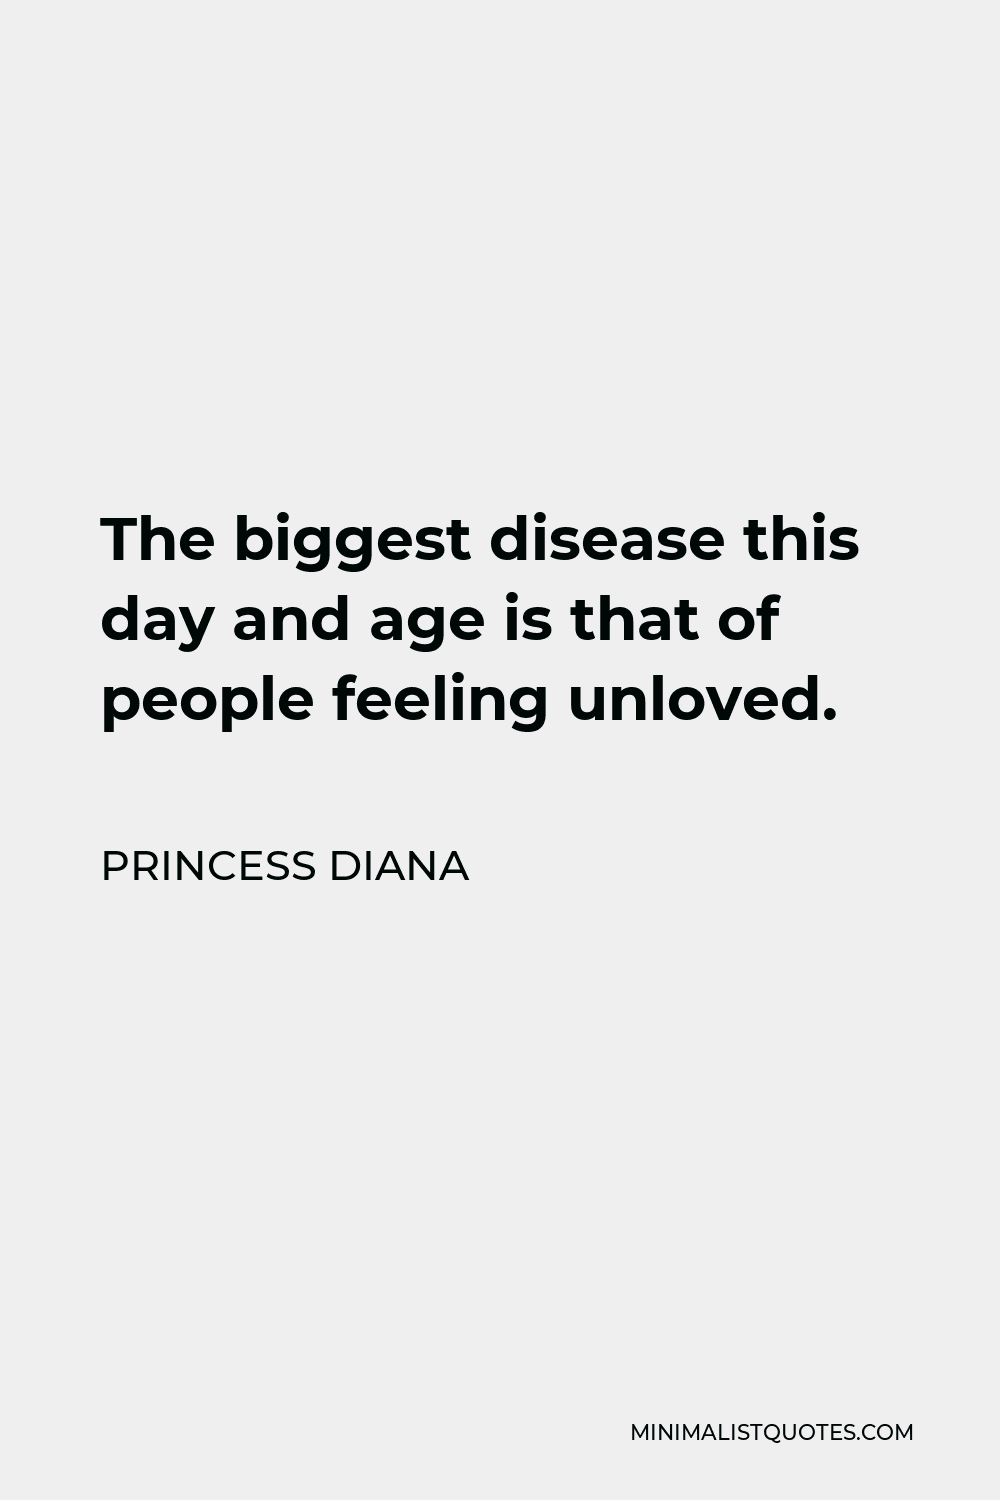 Princess Diana Quote - The biggest disease this day and age is that of people feeling unloved.